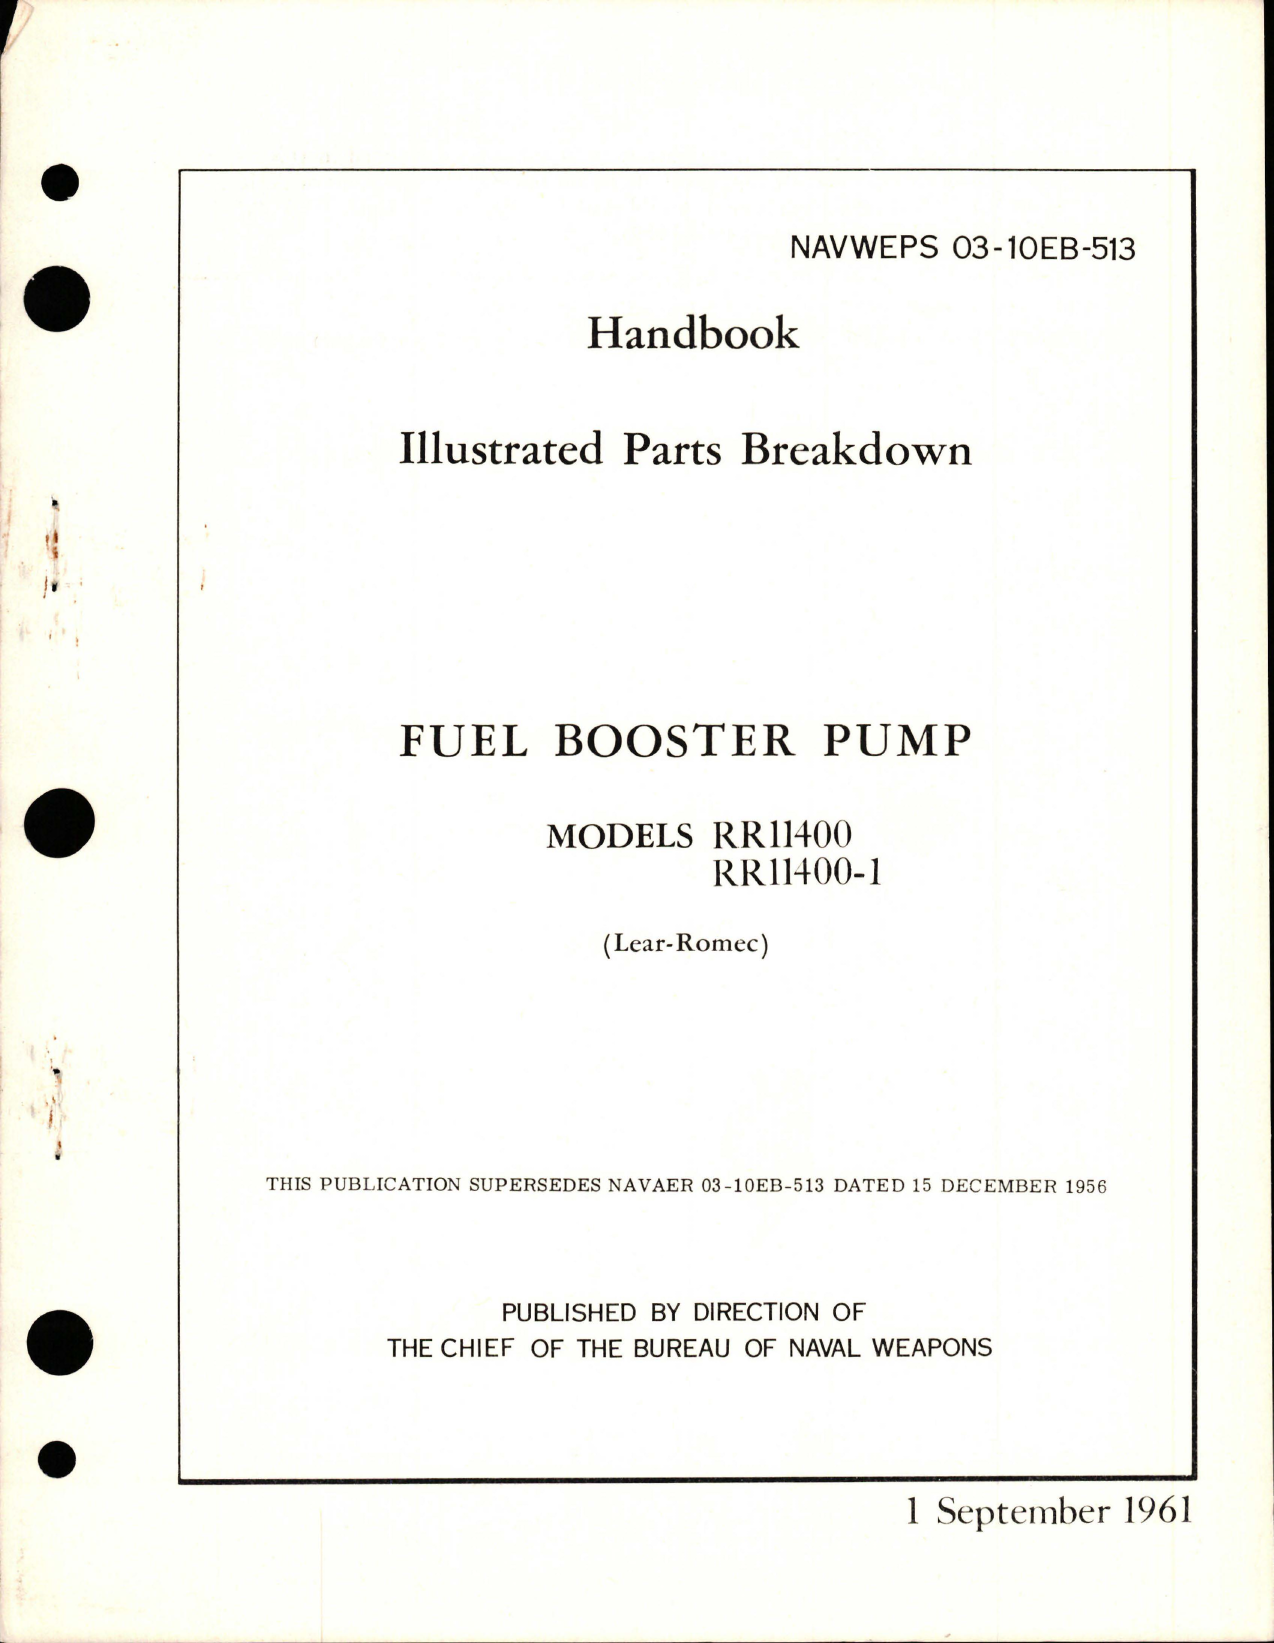 Sample page 1 from AirCorps Library document: Illustrated Parts Breakdown for Fuel Booster Pump - Models RR11400, RR11400-1